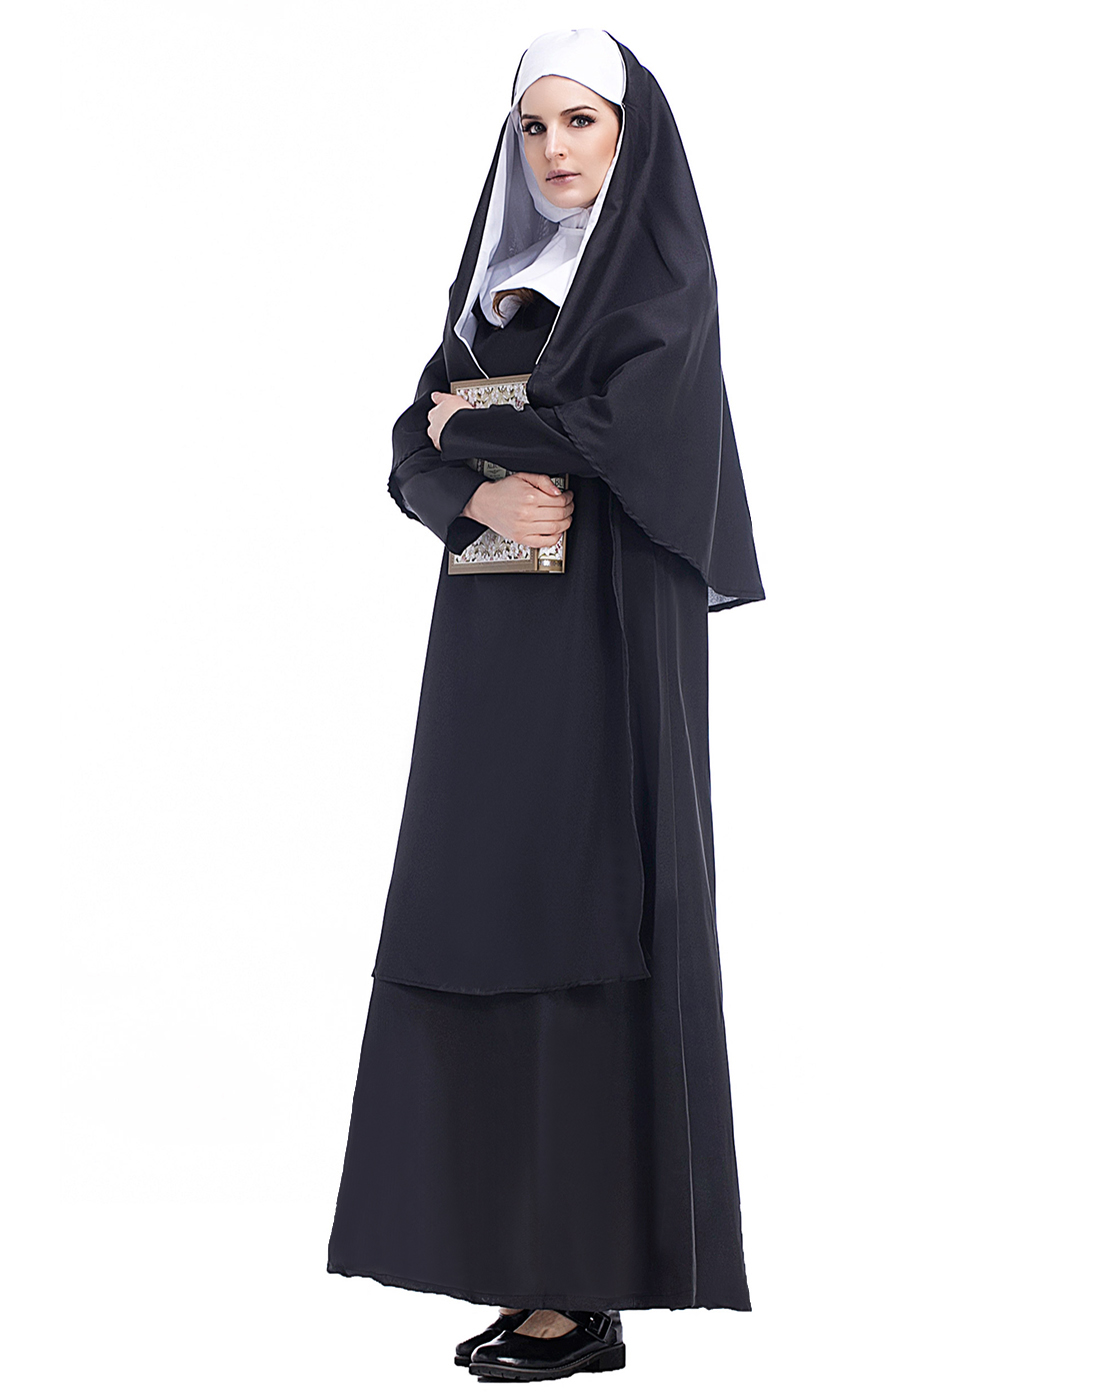 HDE Nun Costume for Women Traditional Adult Sister Black Robe and Habit Religious Halloween Costumes - image 2 of 4